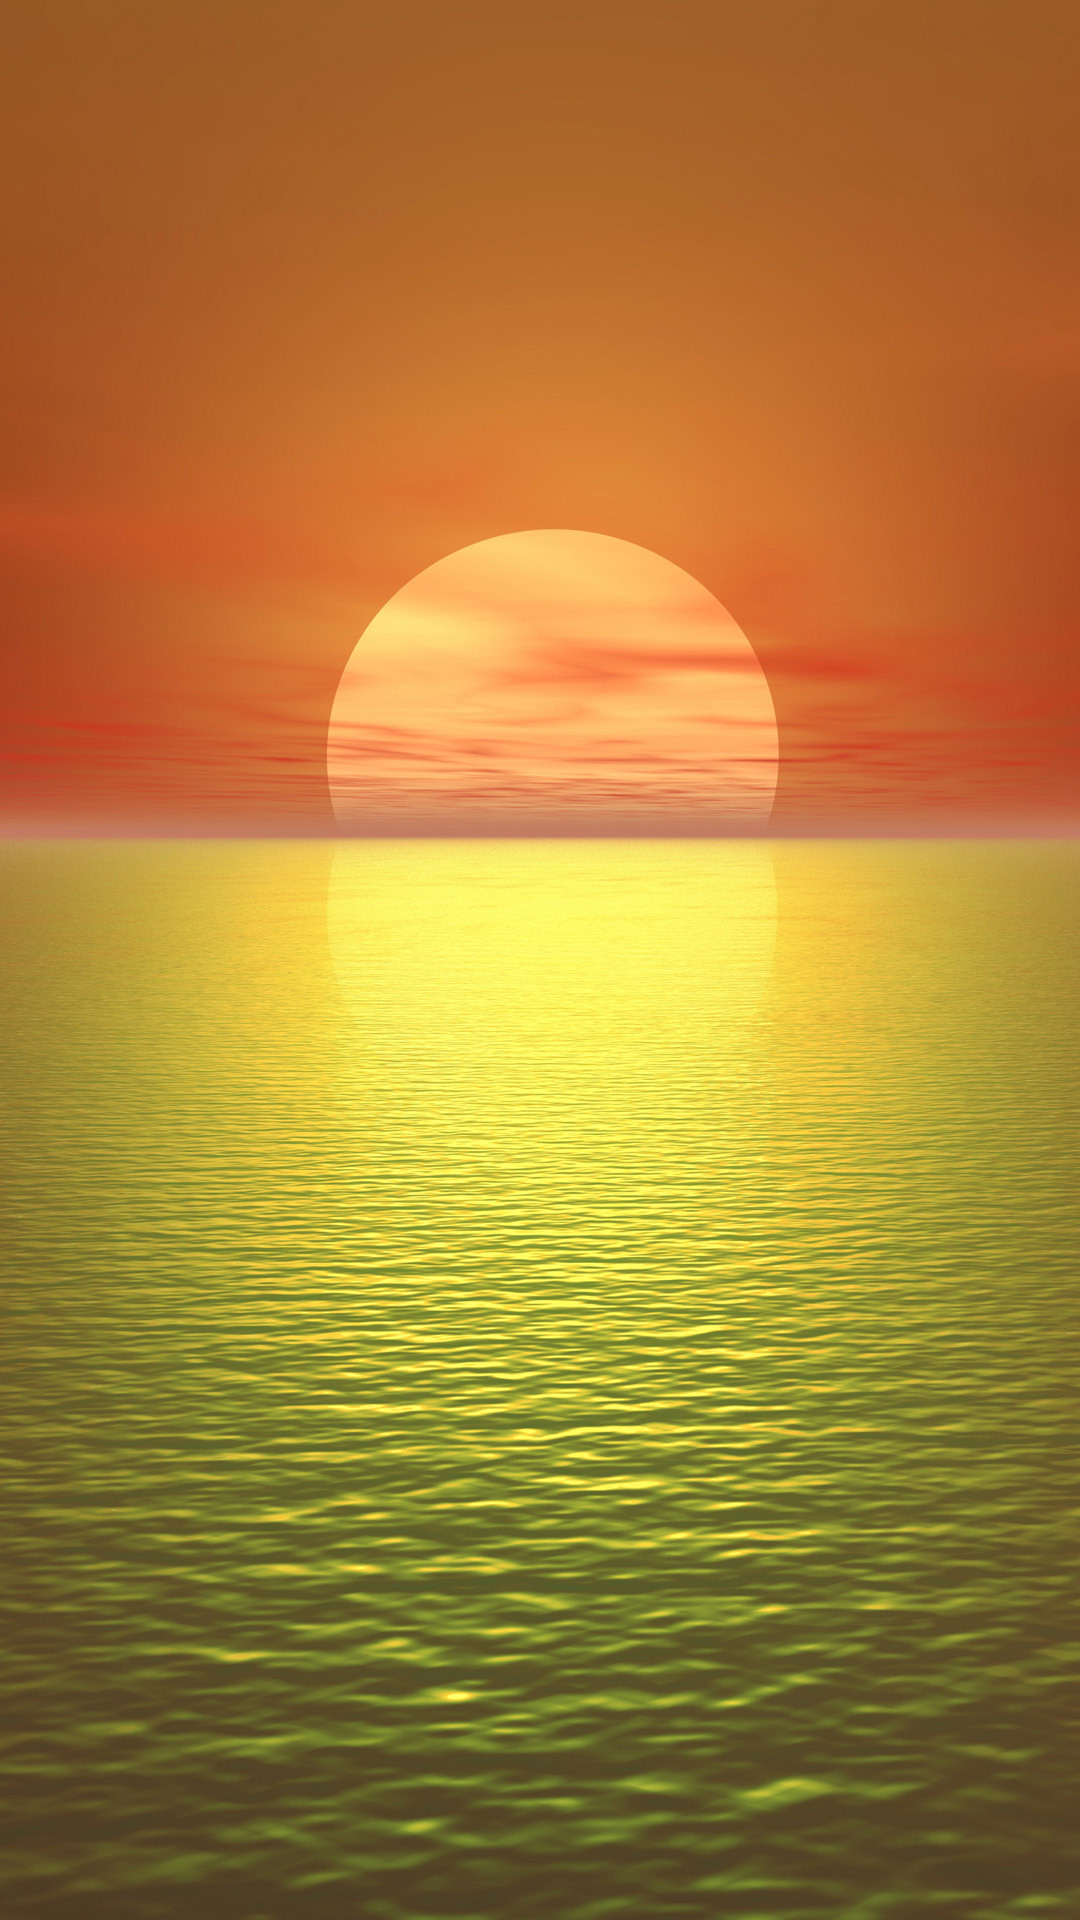 1080x1920 The most tranquil sunset iPhone 6 wallpaper